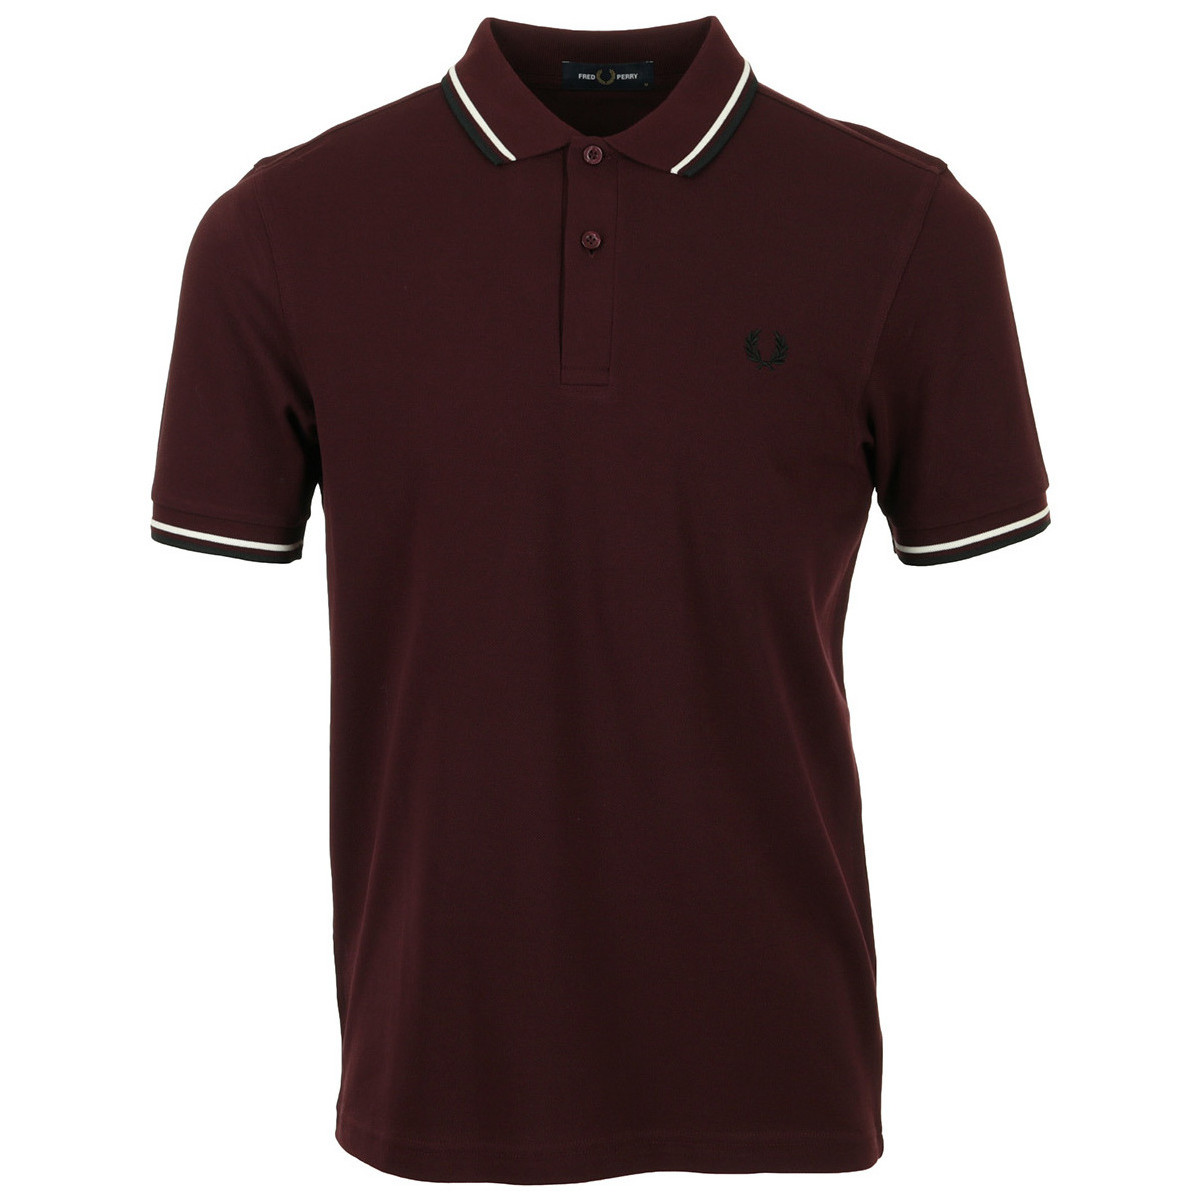 Abbigliamento Uomo T-shirt & Polo Fred Perry Twin Tipped Shirt Rosso